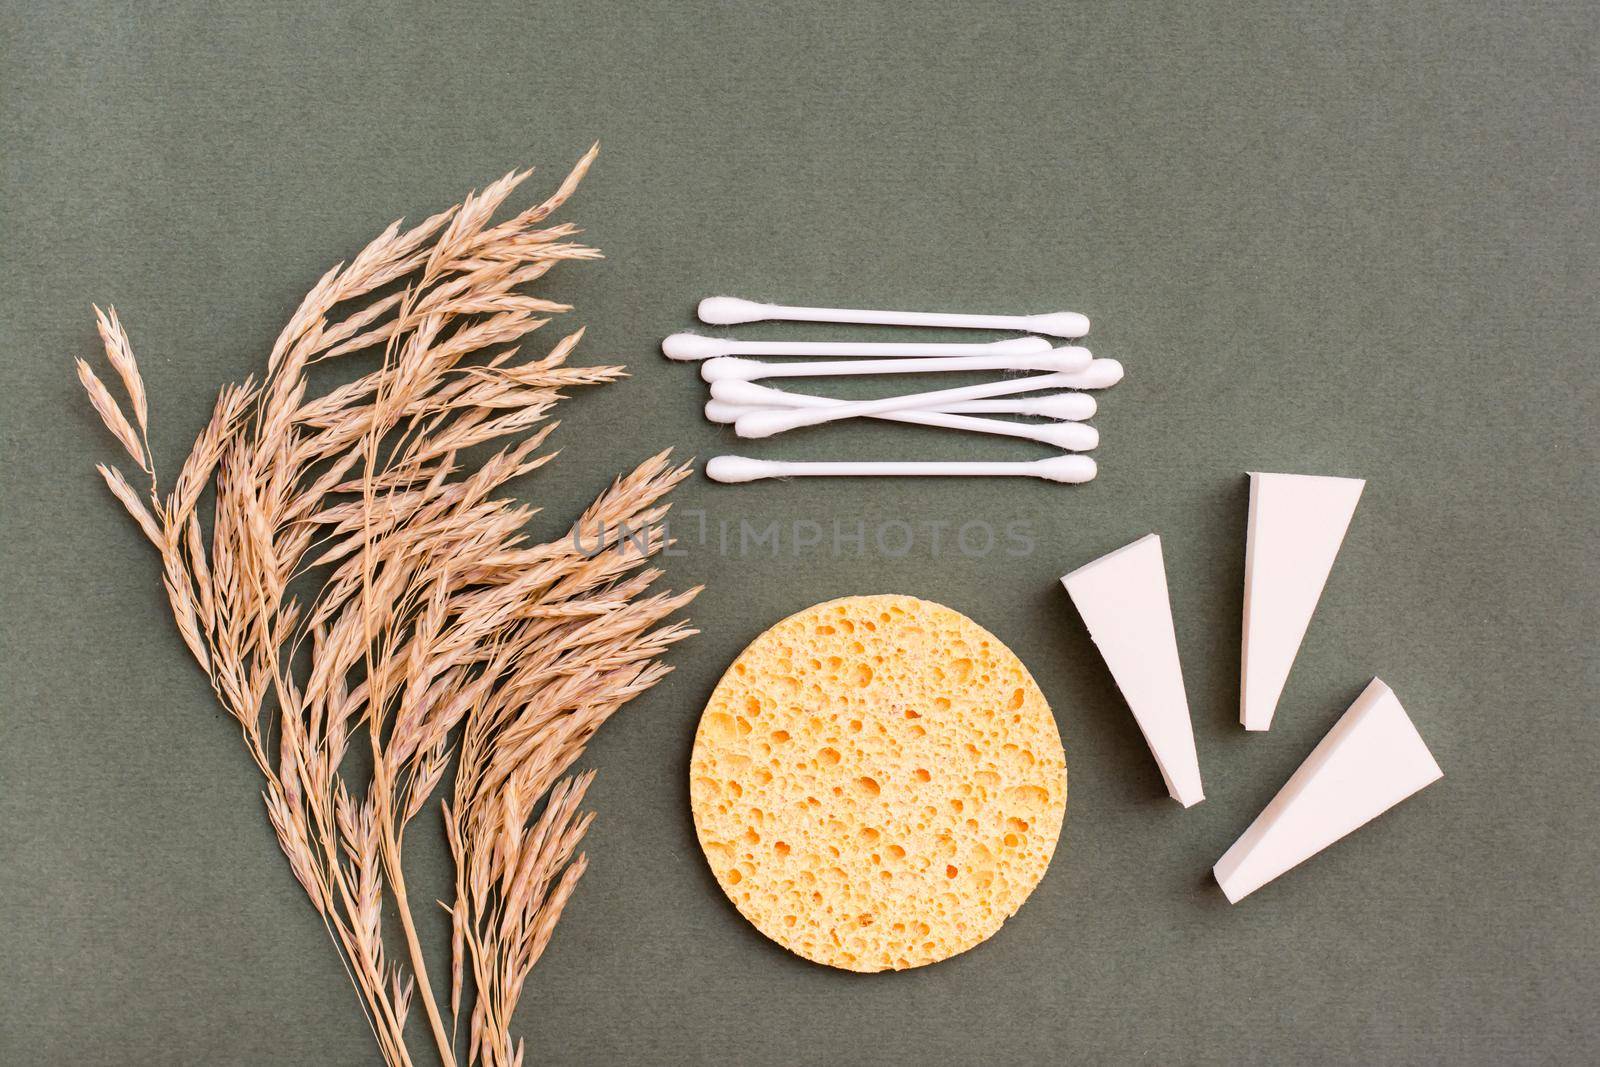 Makeup items. Two types of sponges, cotton swabs and ears of grass on a green background